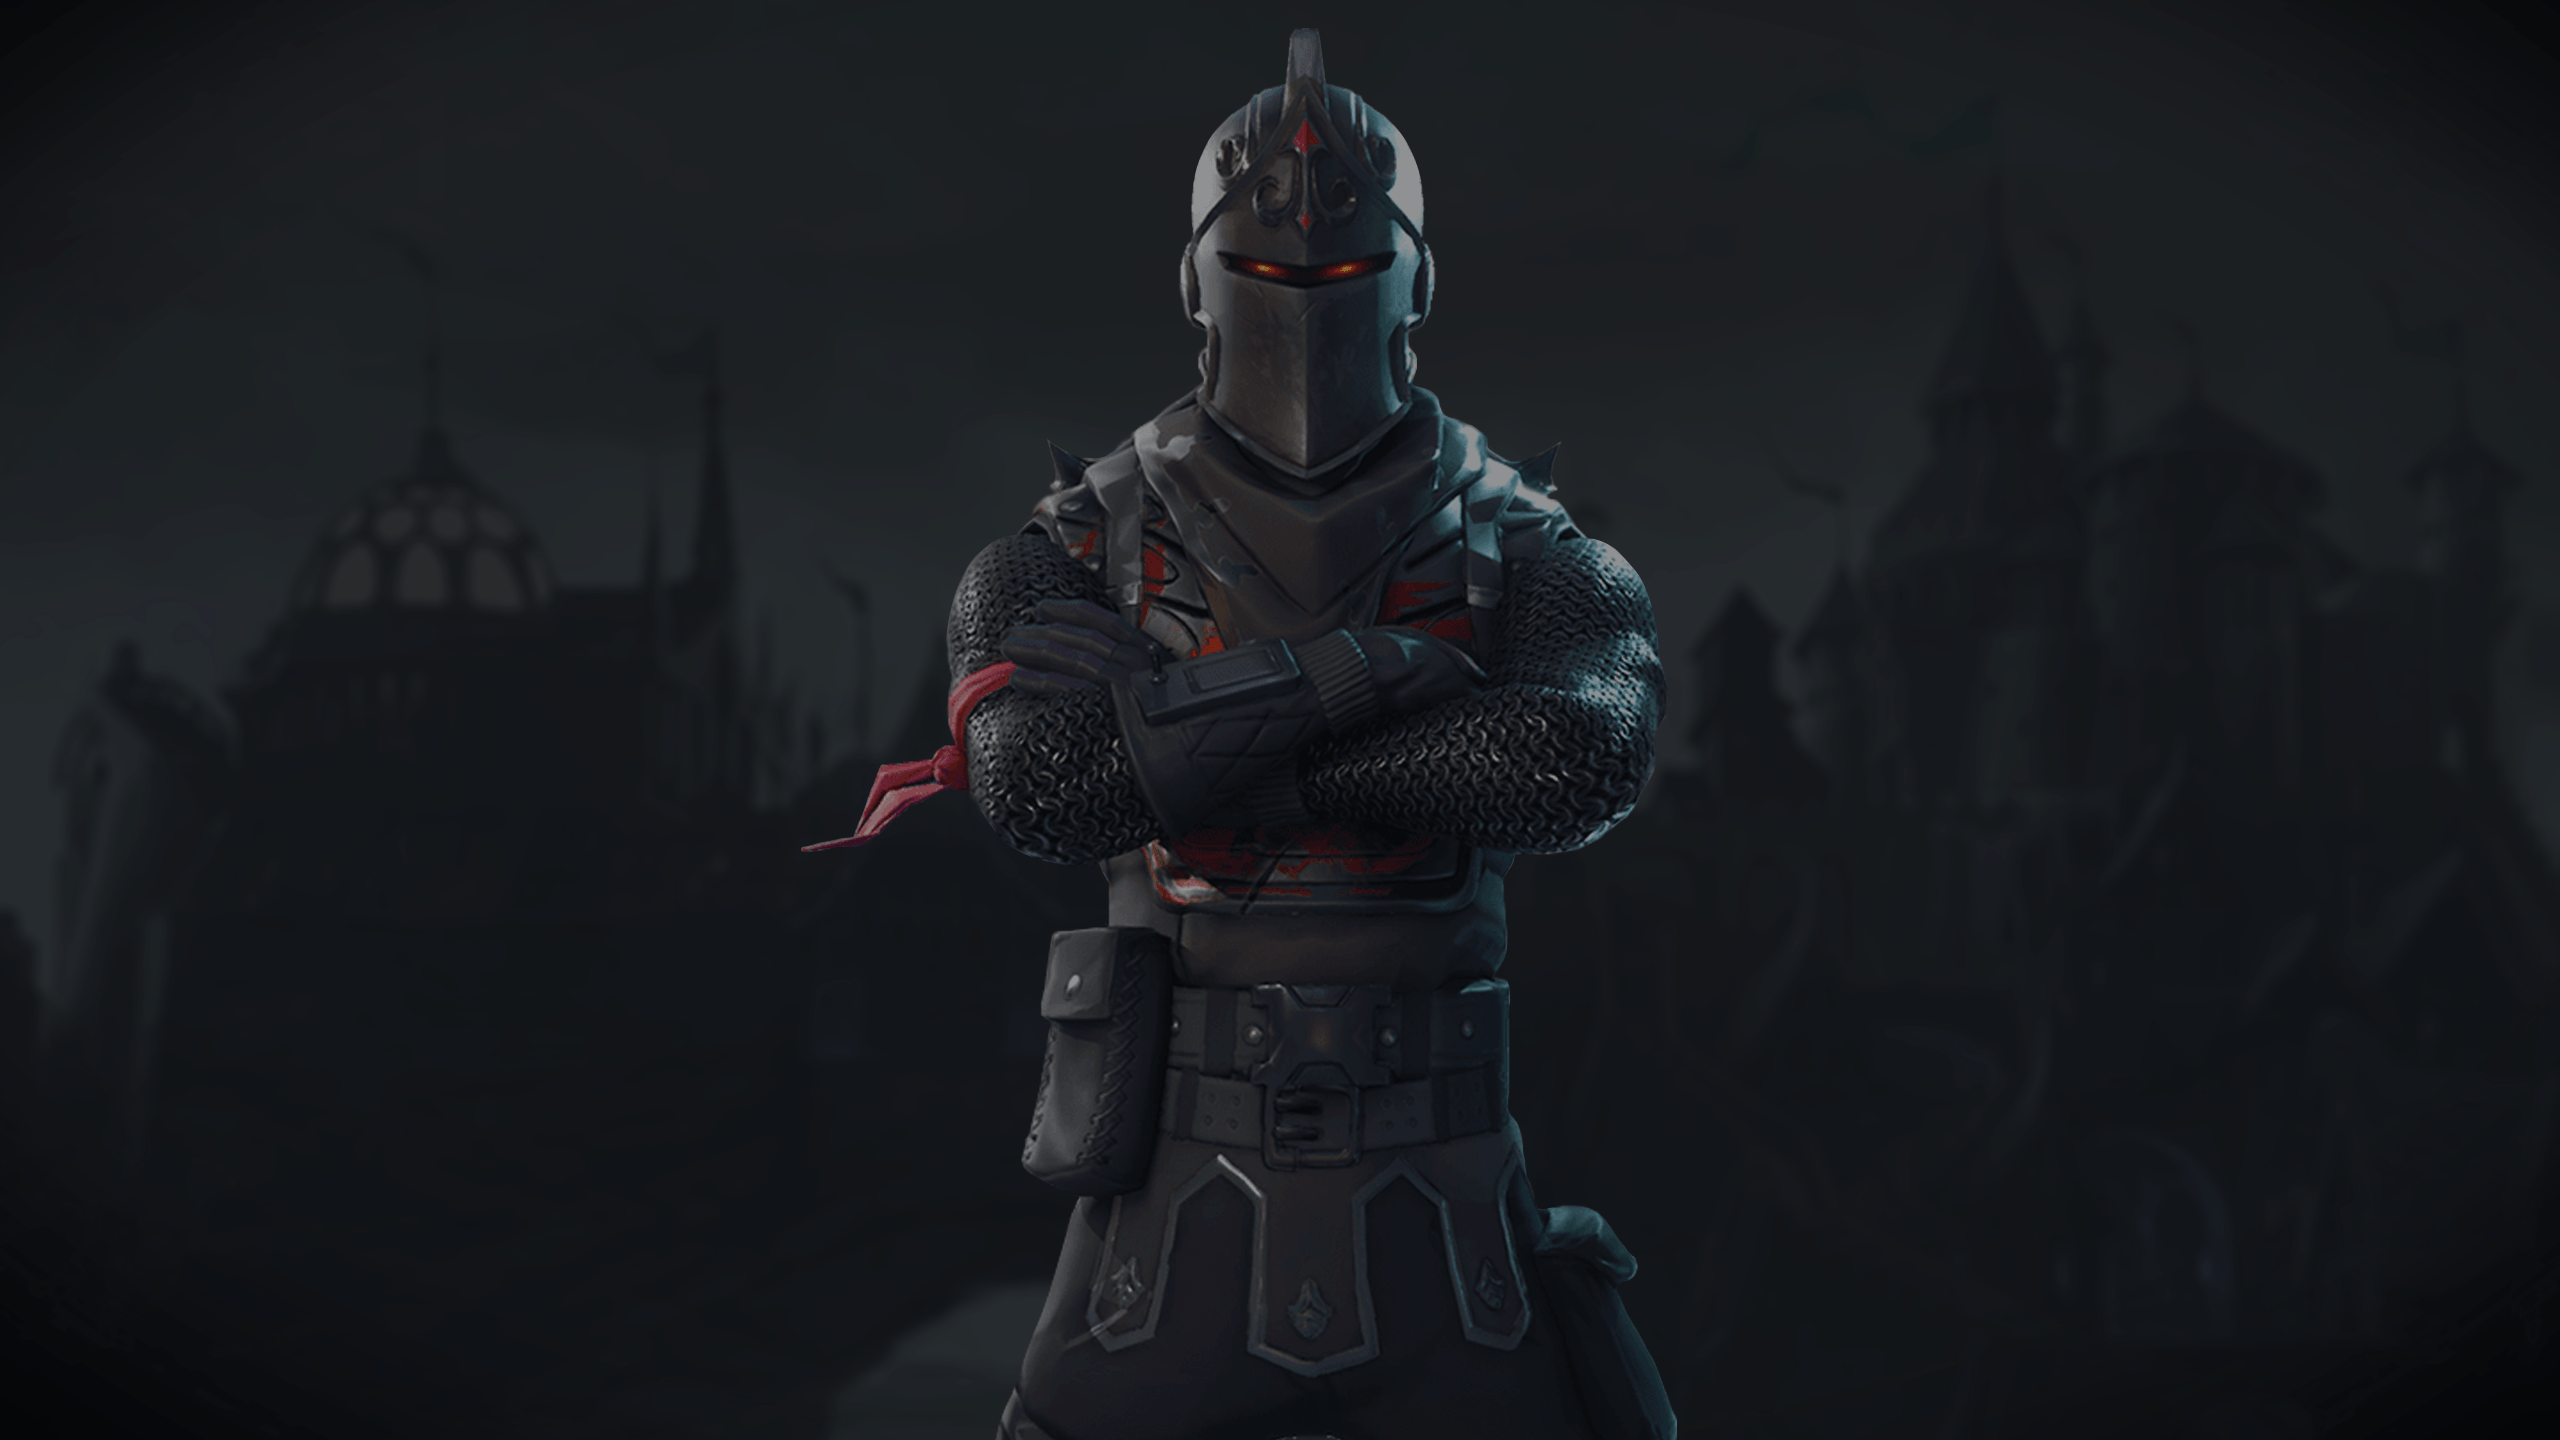 Black Knight wallpaper for you all to enjoy